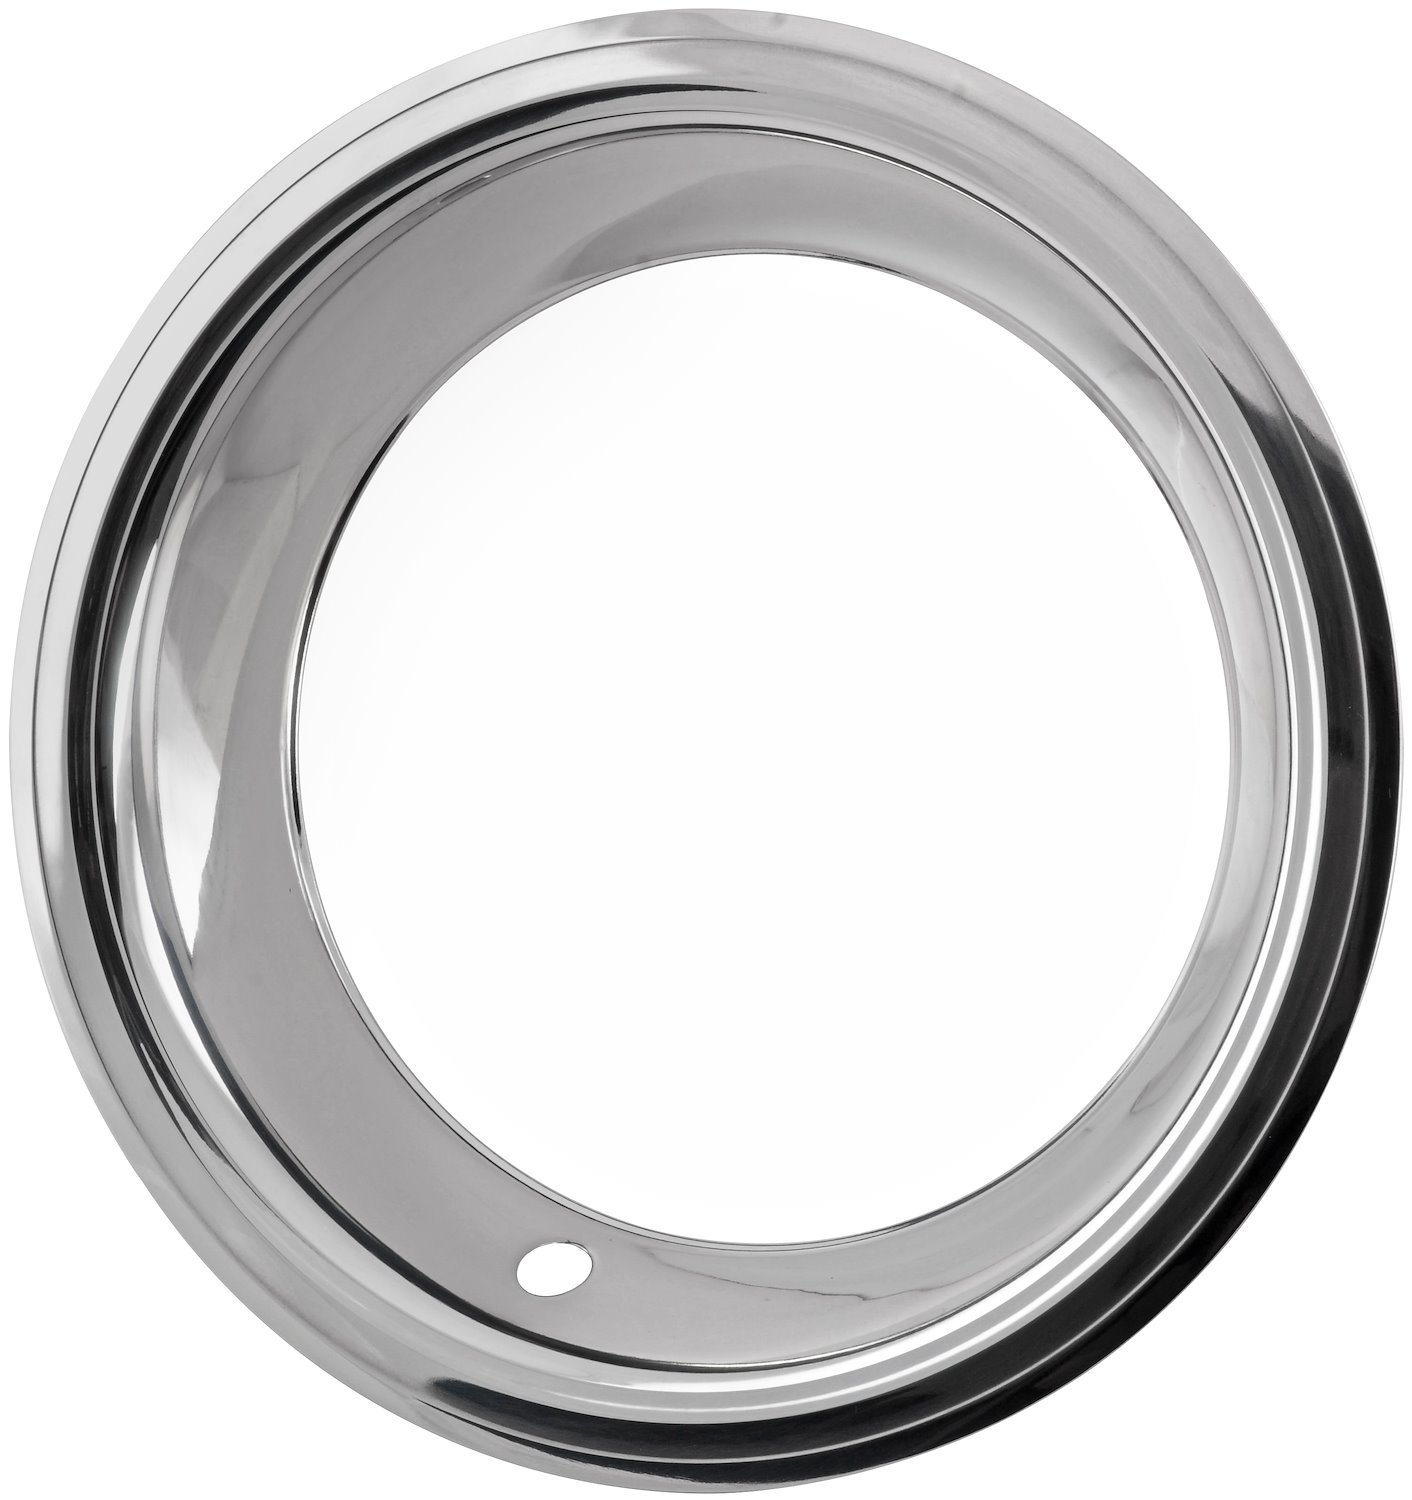 JEGS 681281: Stainless Steel Trim Ring Fits JEGS 15 in. x 7 in. Rally Wheels  - JEGS High Performance